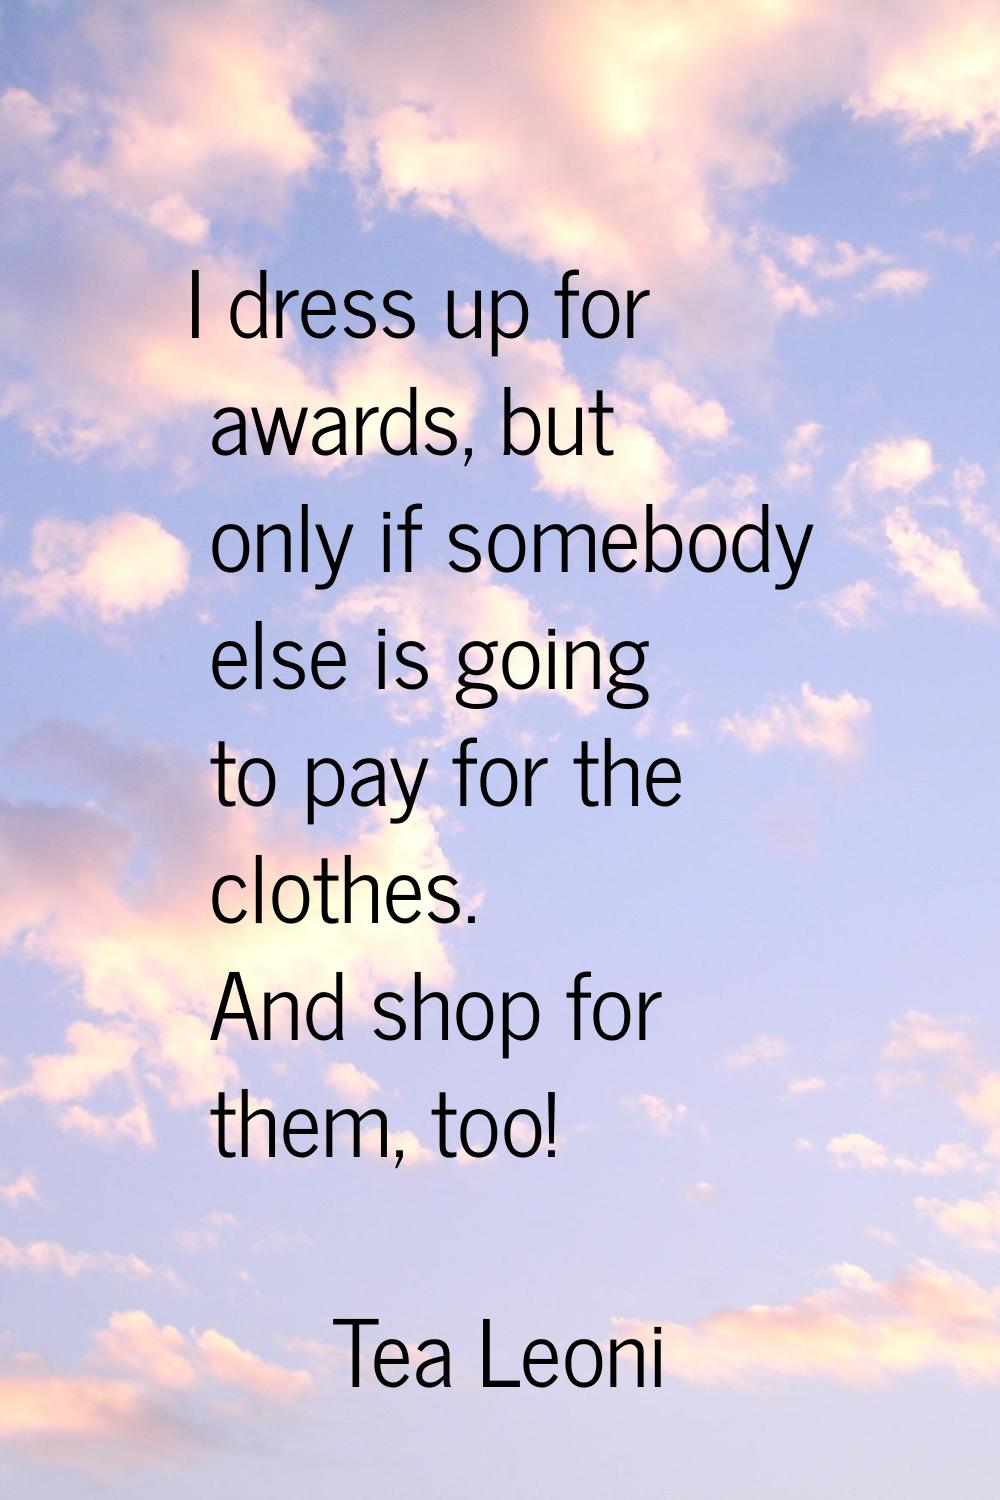 I dress up for awards, but only if somebody else is going to pay for the clothes. And shop for them